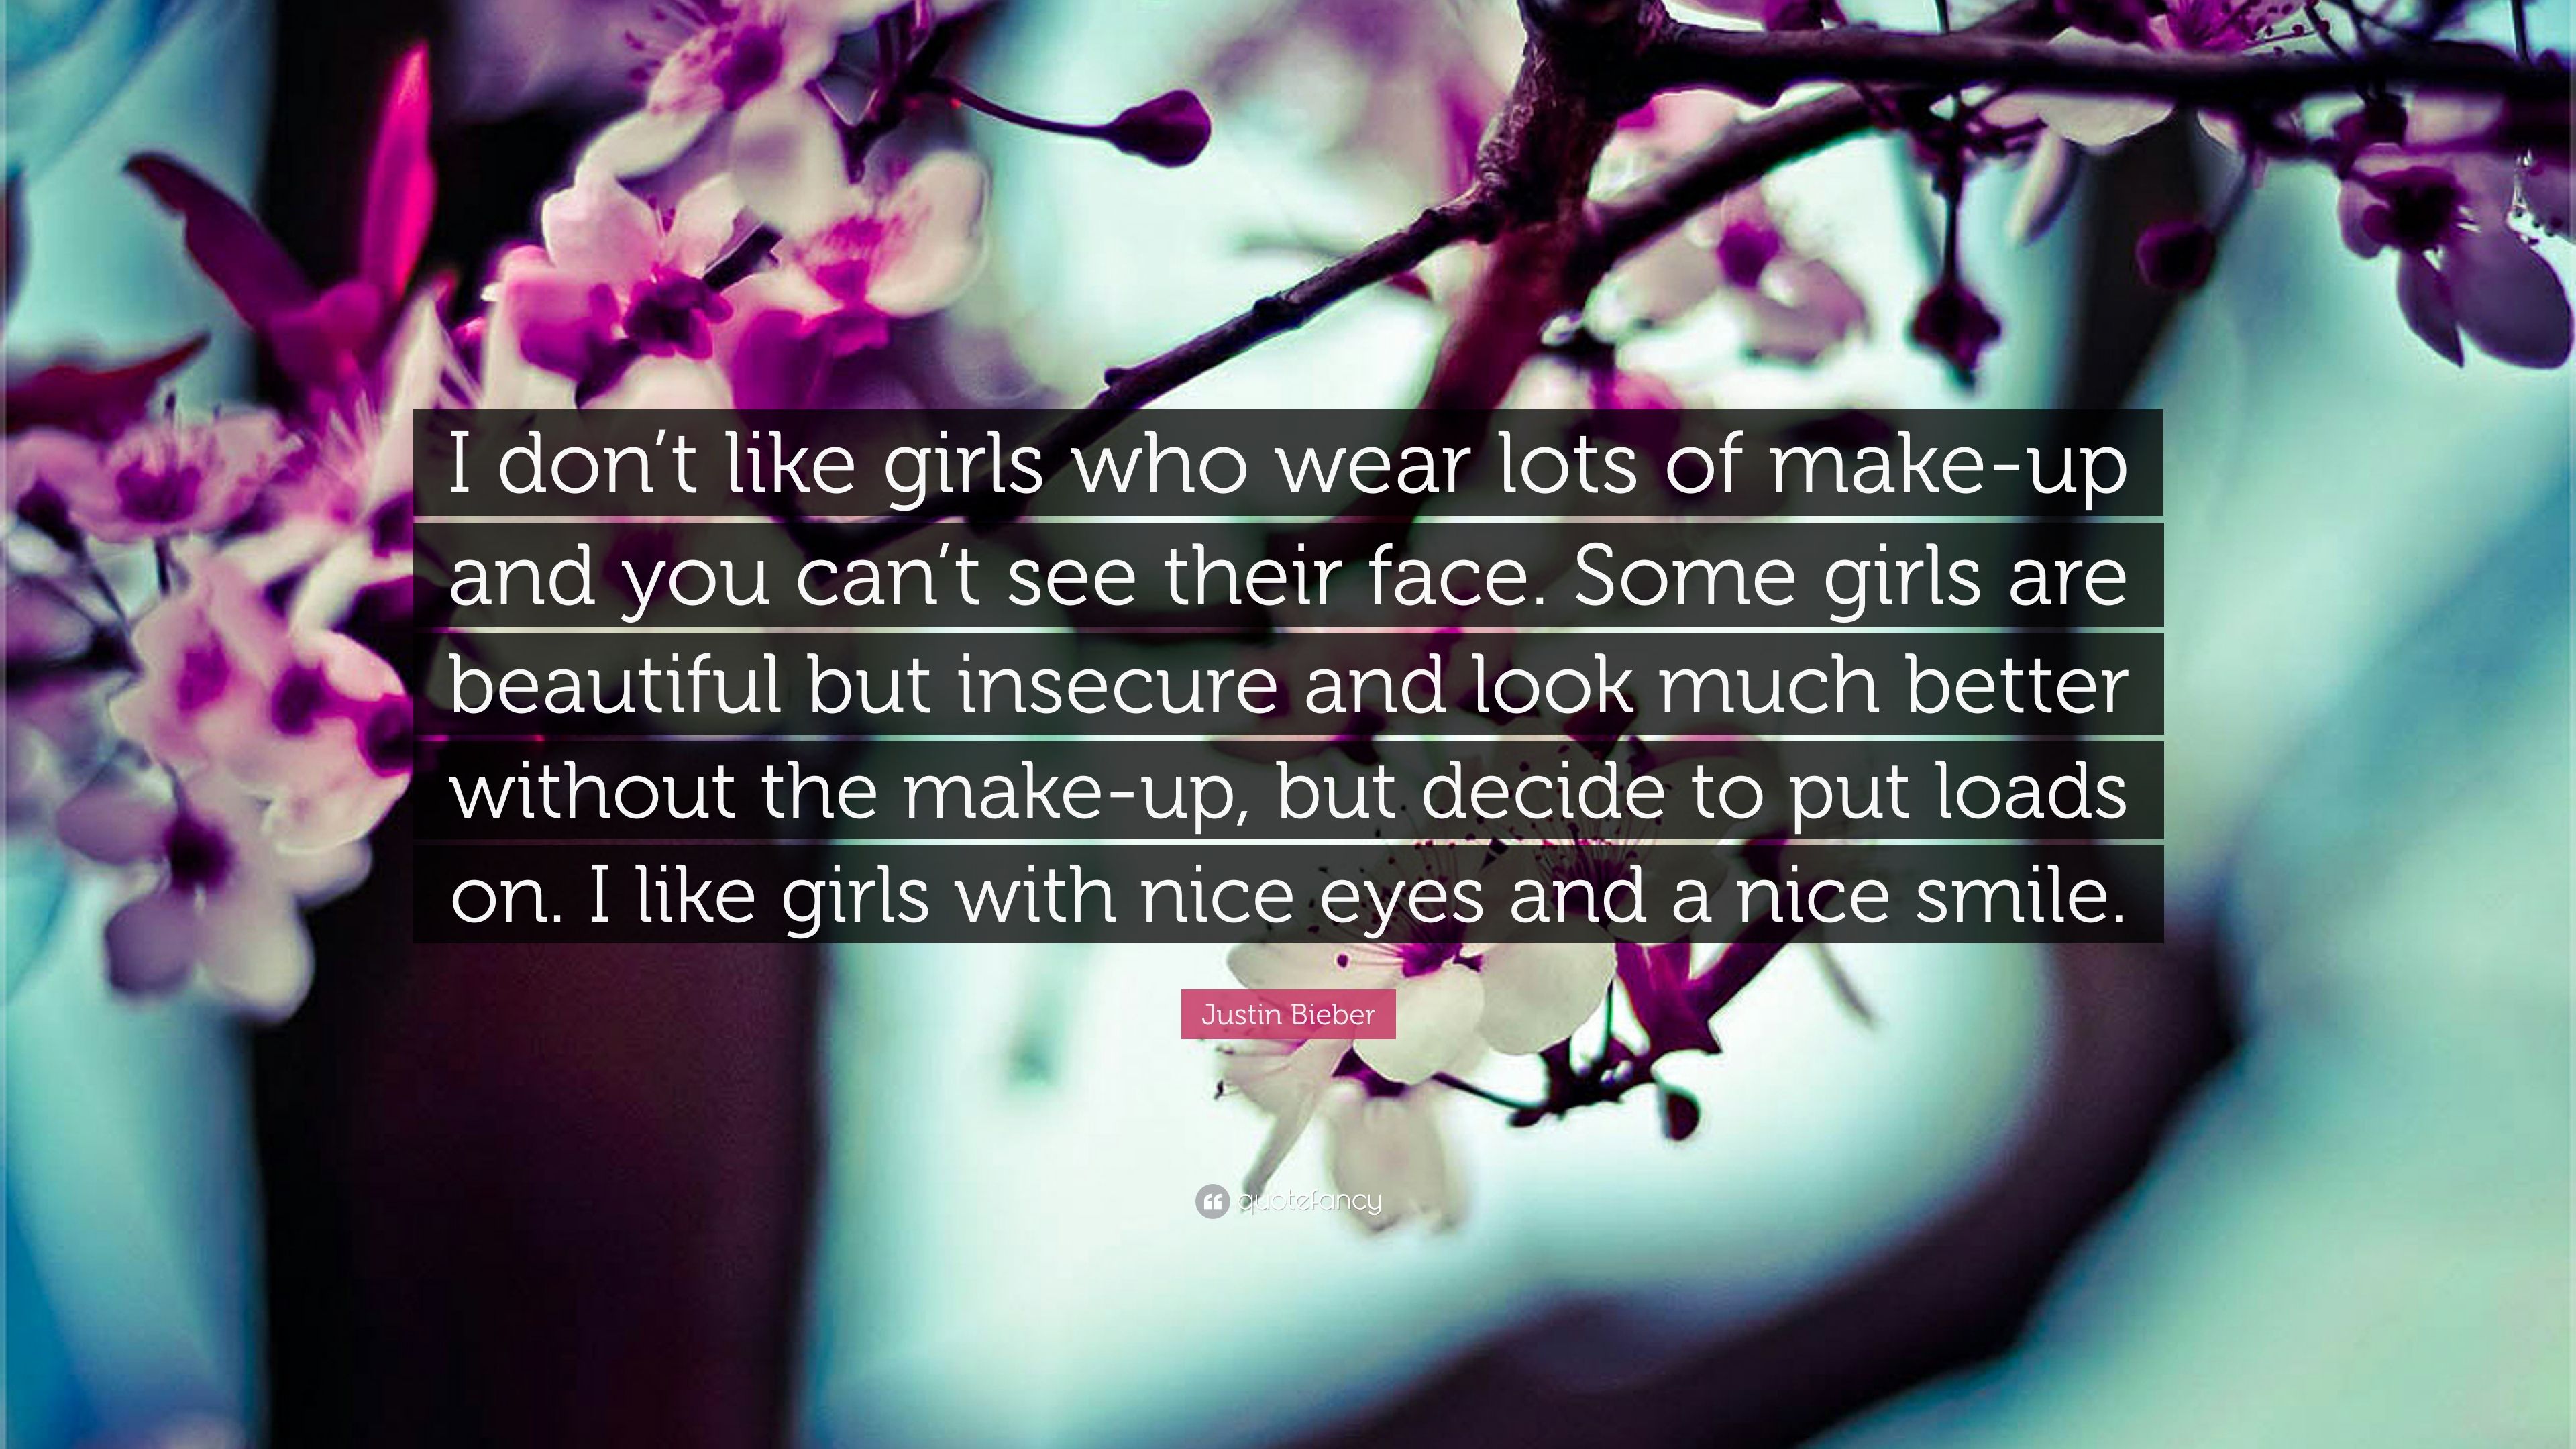 Justin Bieber Quote: “I Don't Like Girls Who Wear Lots Of Make Up And You Can't See Their Face. Some Girls Are Beautiful But Insecure And Look.” (10 Wallpaper)